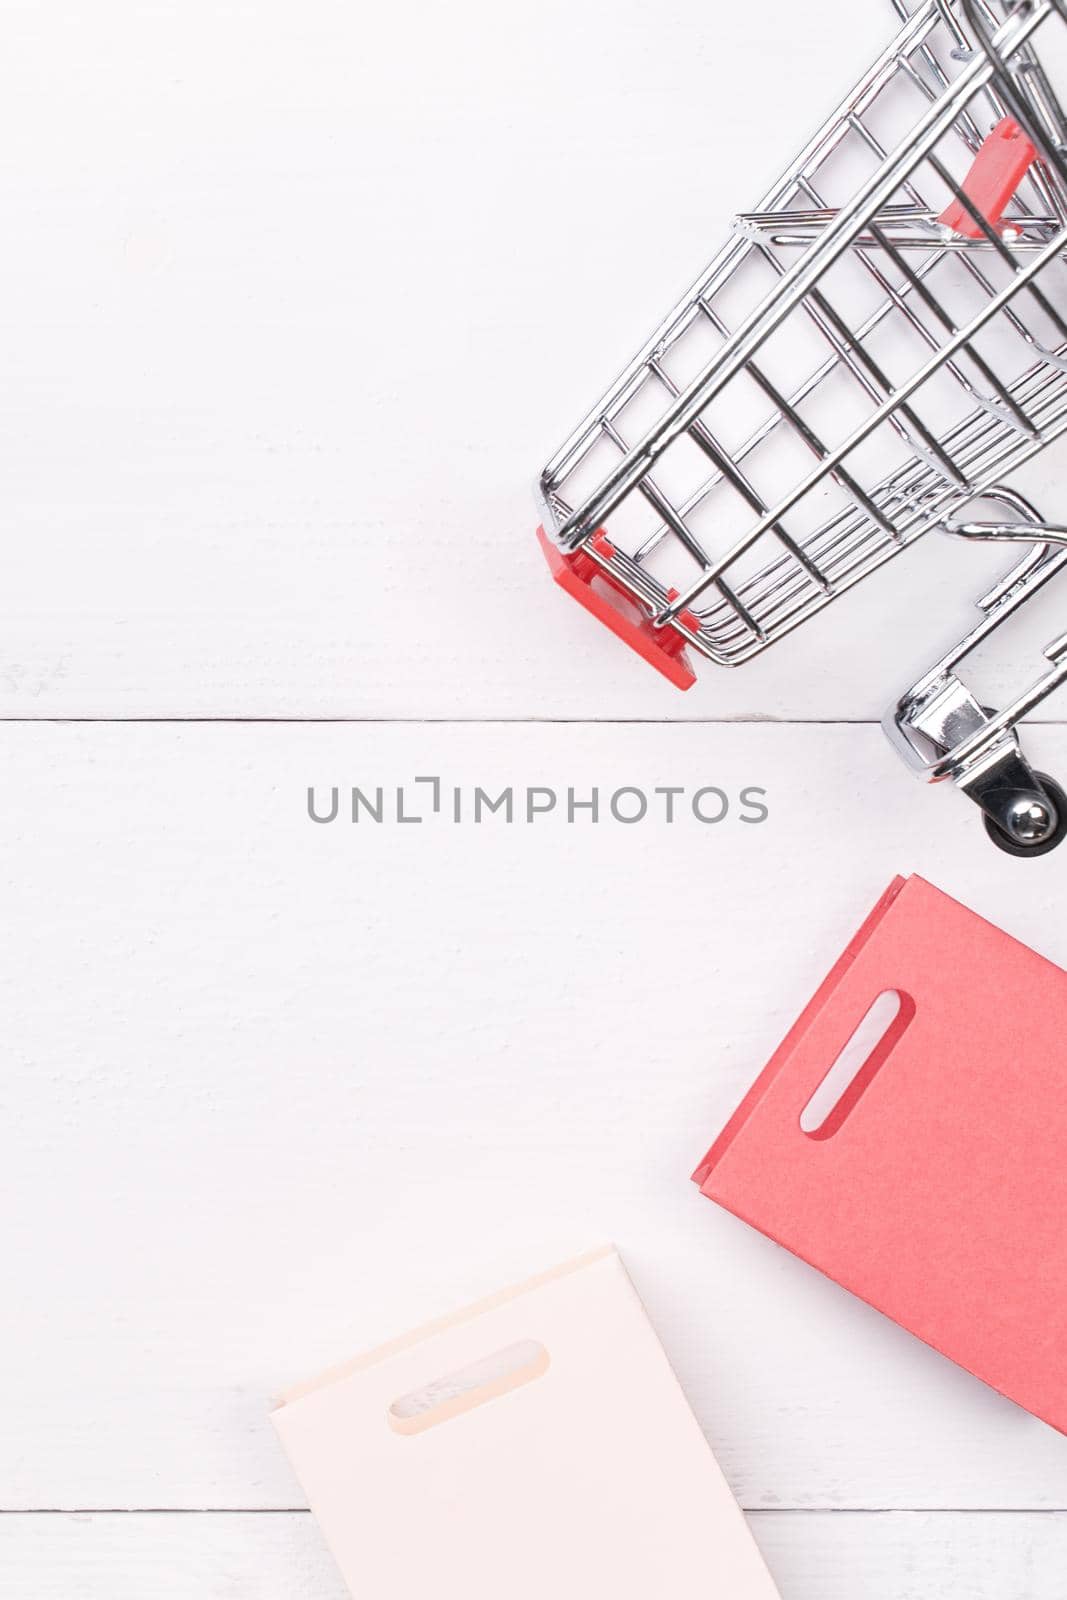 Abstract design element,annual sale,shopping season concept,mini cart with colorful paper bag on white wooden table background,top view,flat lay